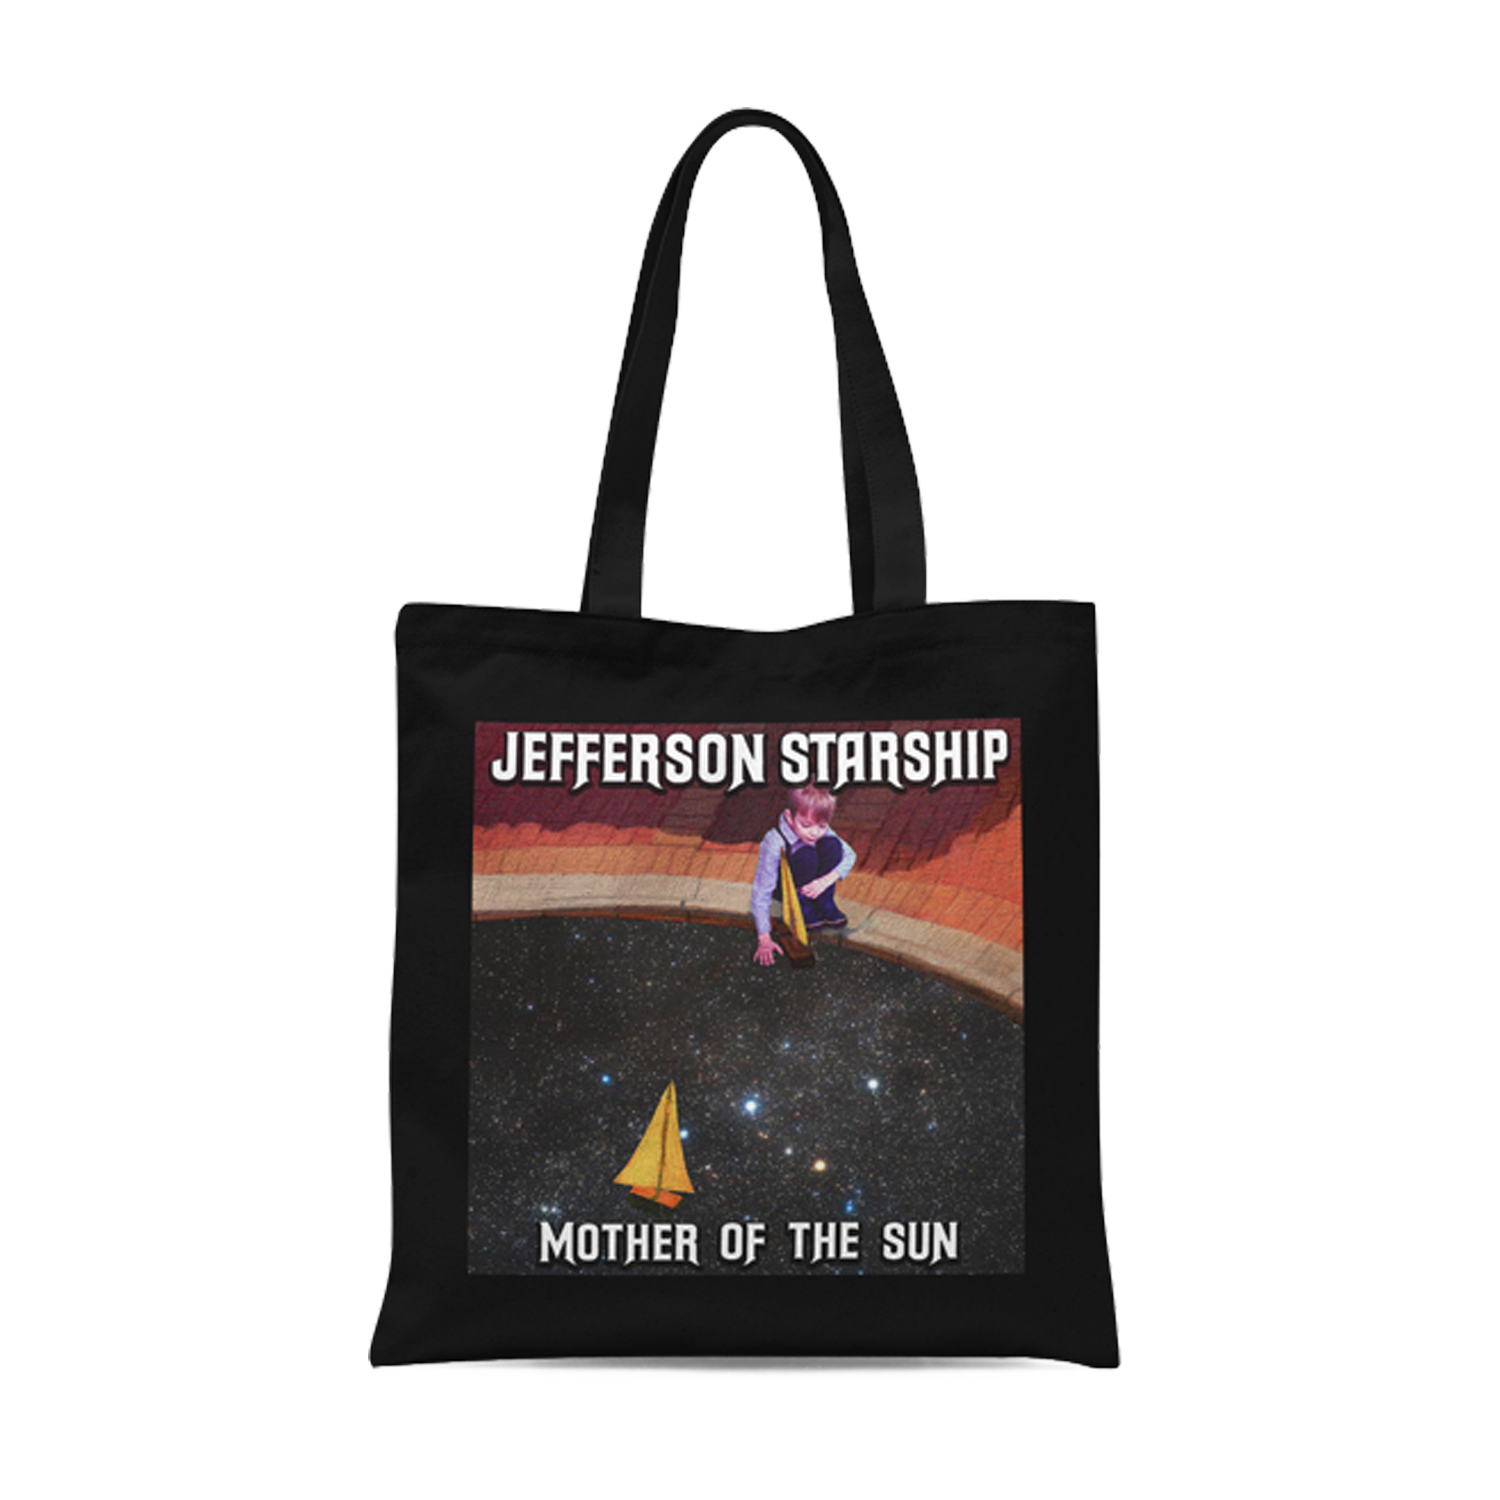 Jefferson Starship - Mother of the Sun Tote Bag